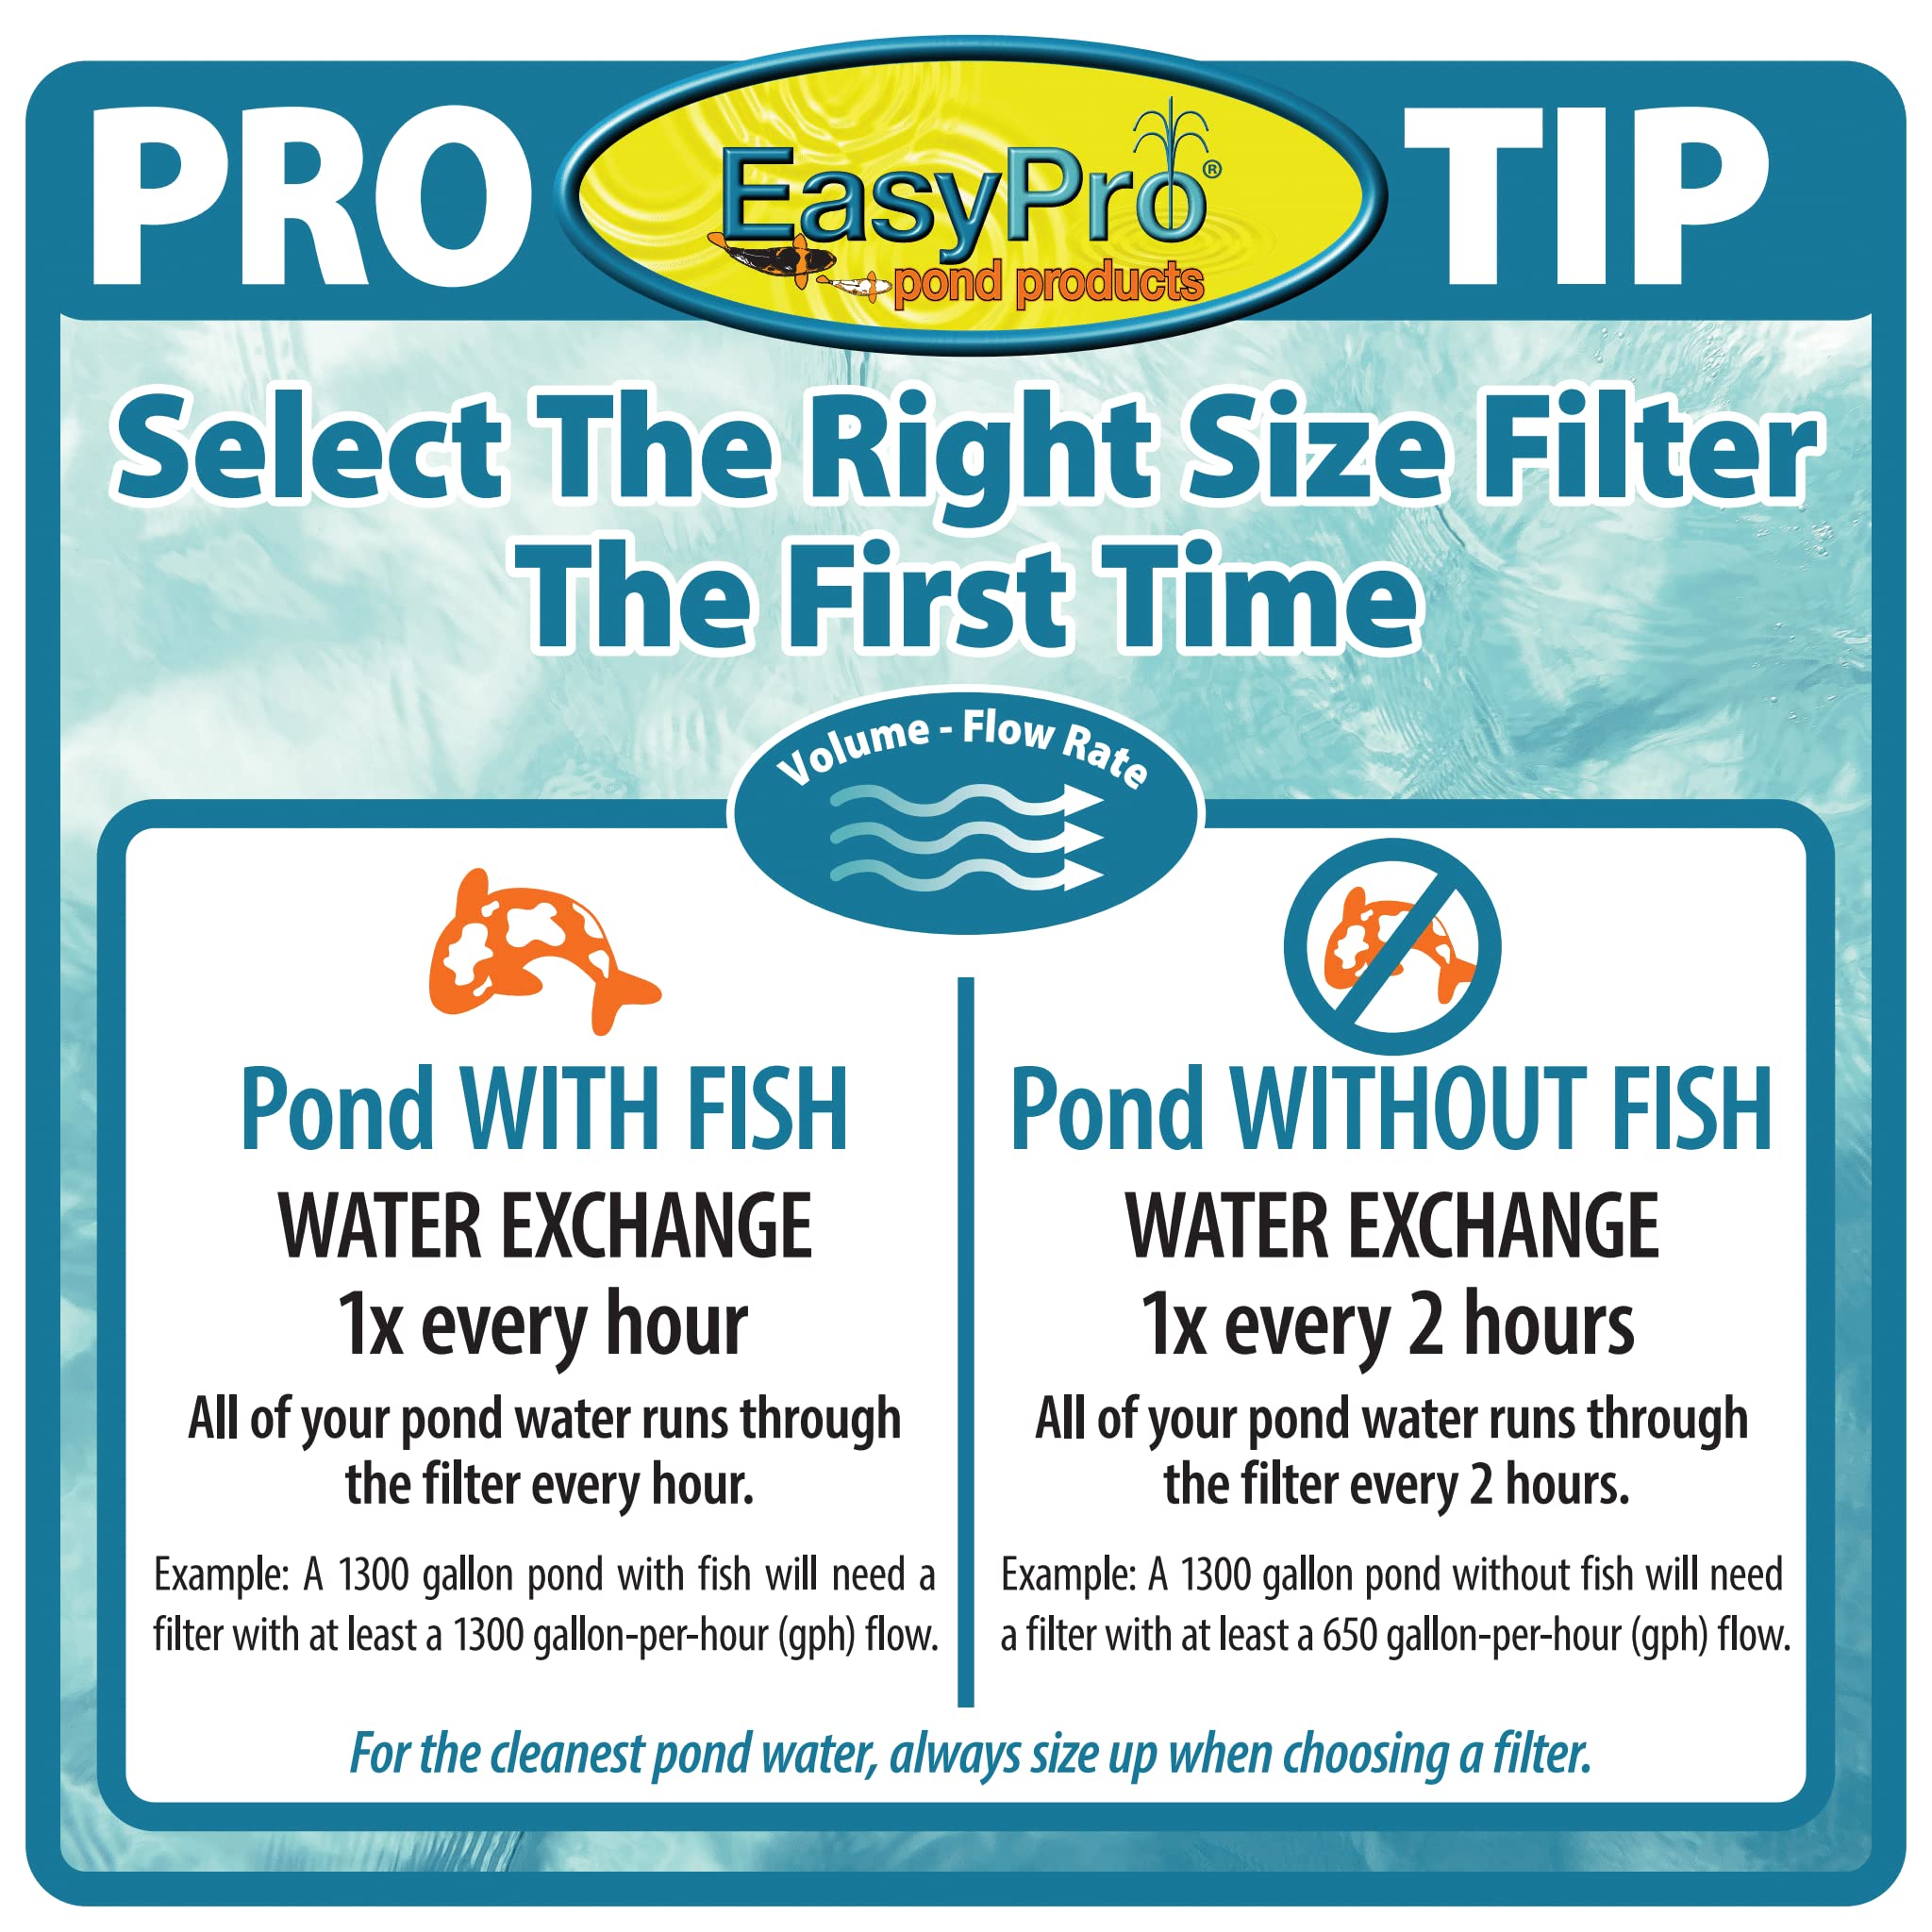 EasyPro EC1300 ECO-Clear Pressurized Filter/Dual Filtration/for Ponds up to 1300 Gallons - No Fish OR 650 Gallons - with Fish / 3 Year Limited Warranty